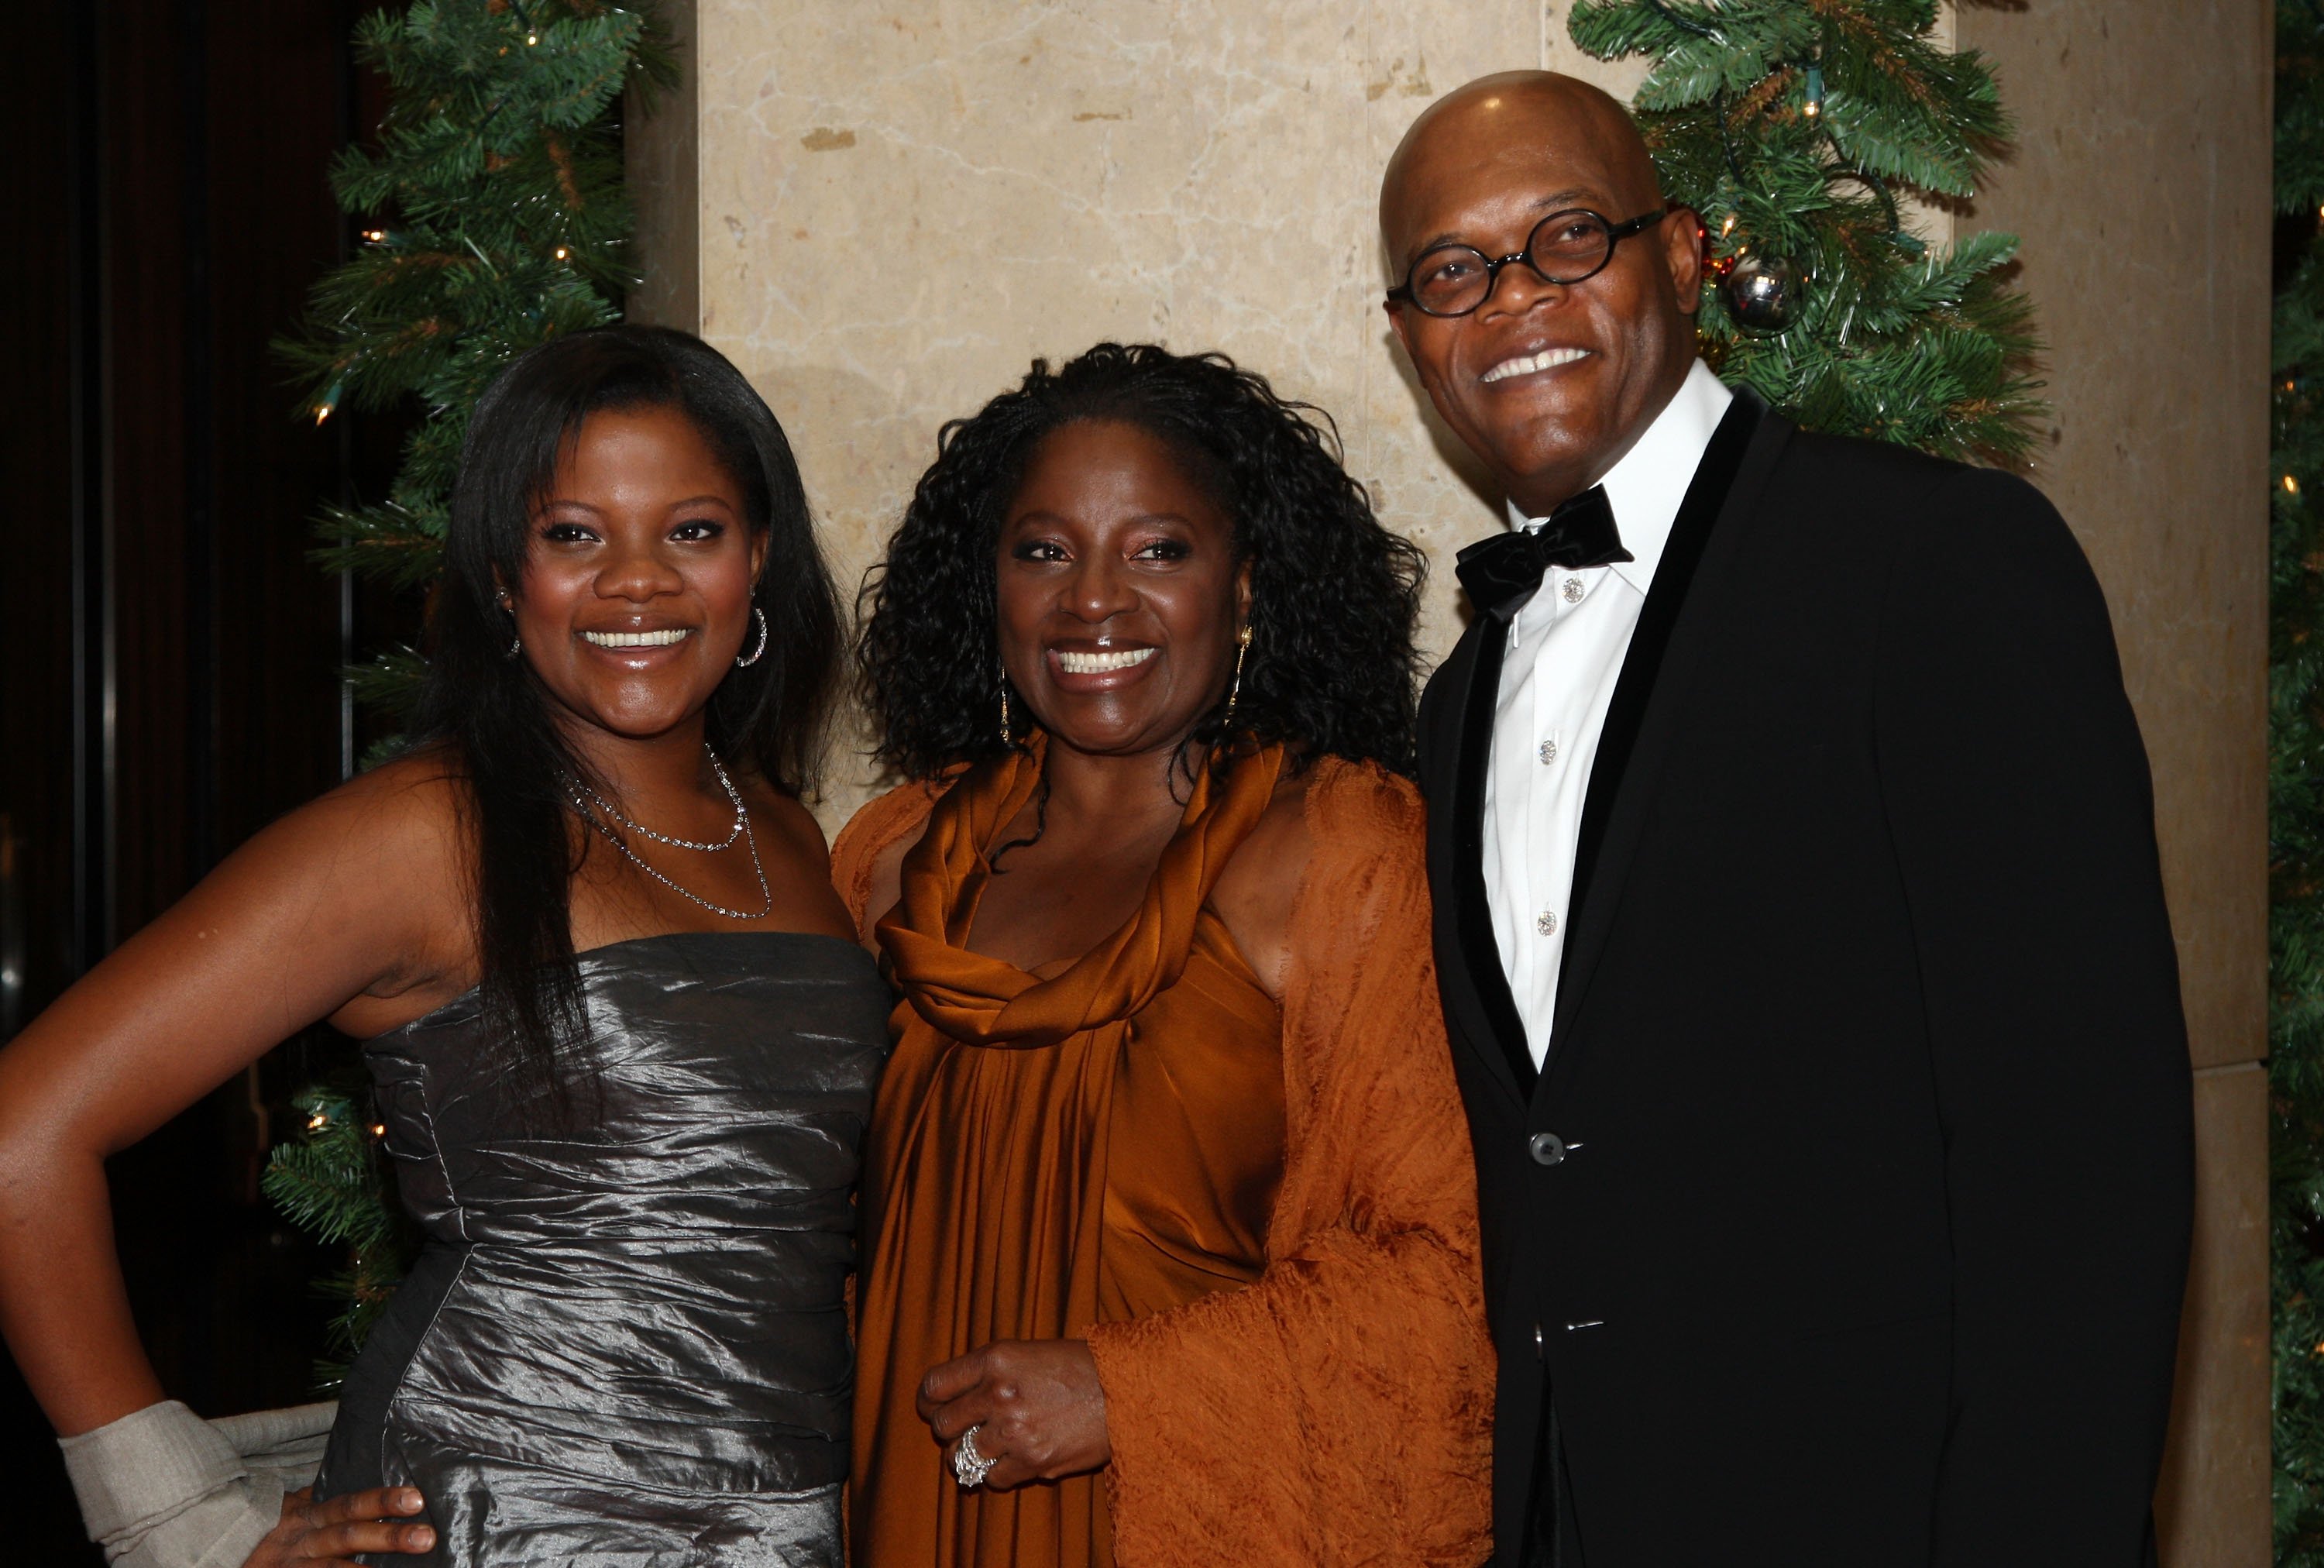 Samuel L. Jackson, LaTanya Richardson and Zoe Jackson arrive at the 23rd annual American Cinematheque show on December 1, 2008 | Photo: GettyImages